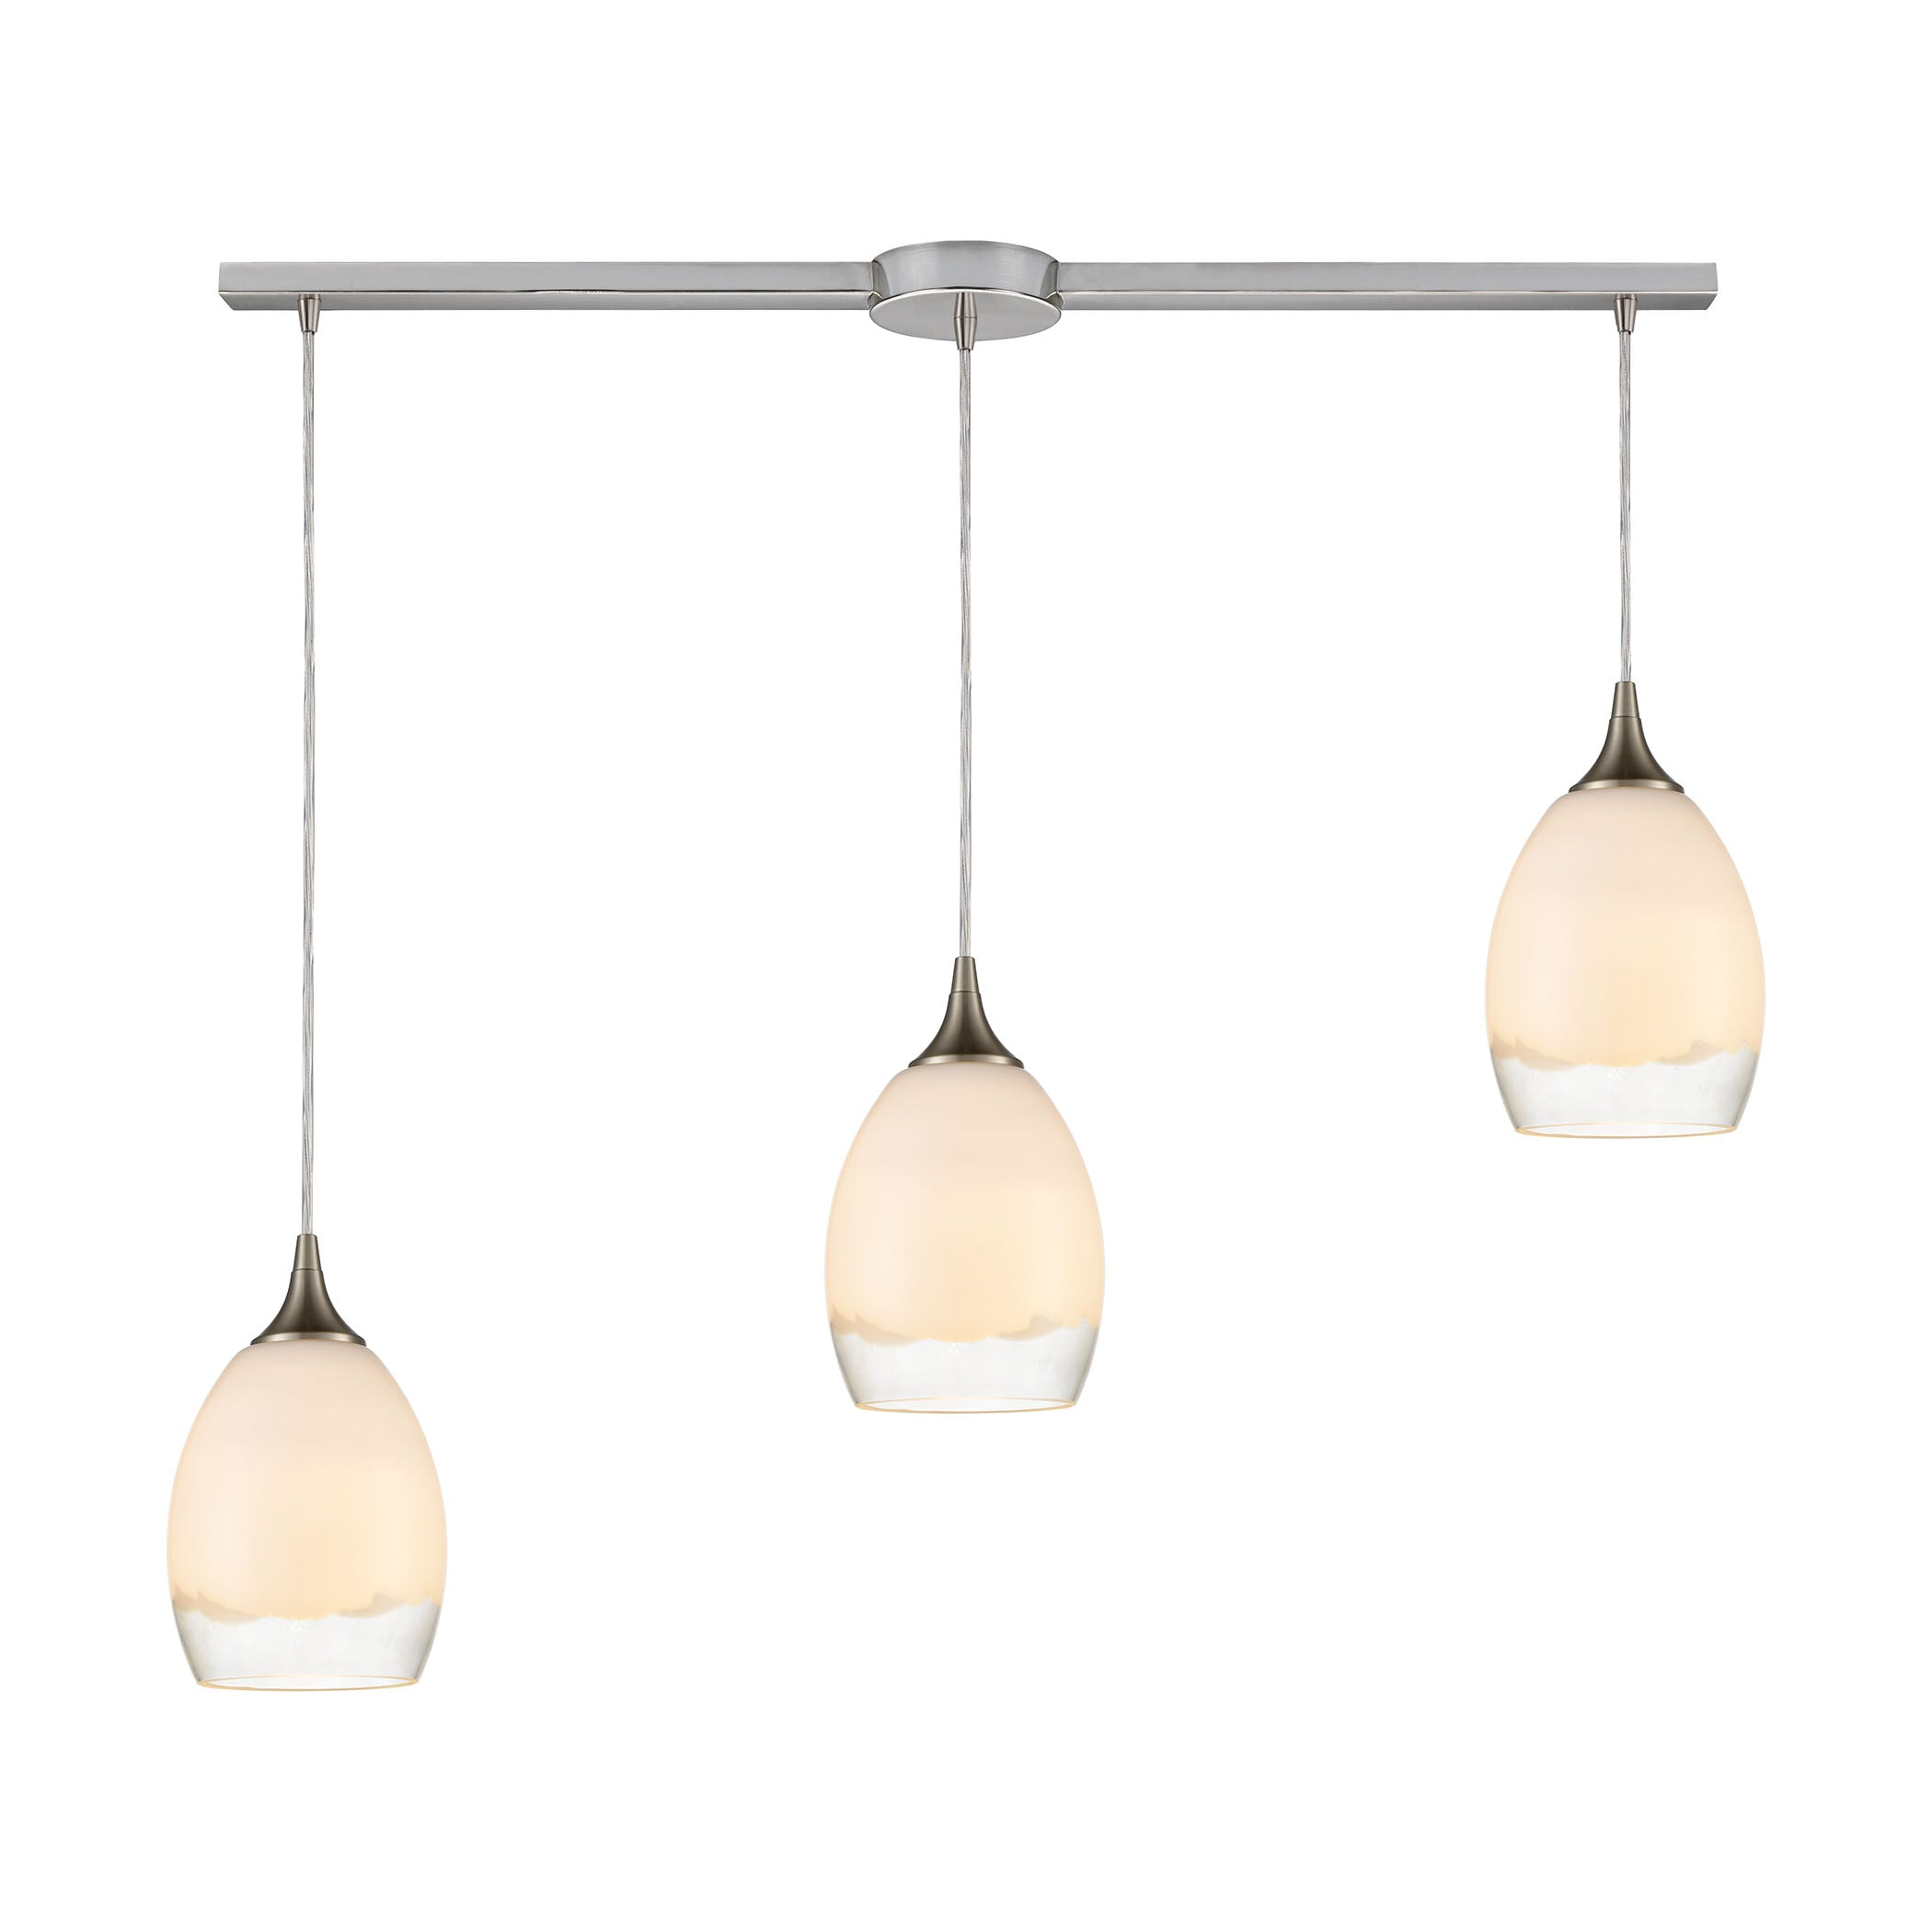 ELK Lighting 85214/3L Cirrus 3-Light Linear Mini Pendant Fixture in Satin Nickel with Opal White and Clear Glass